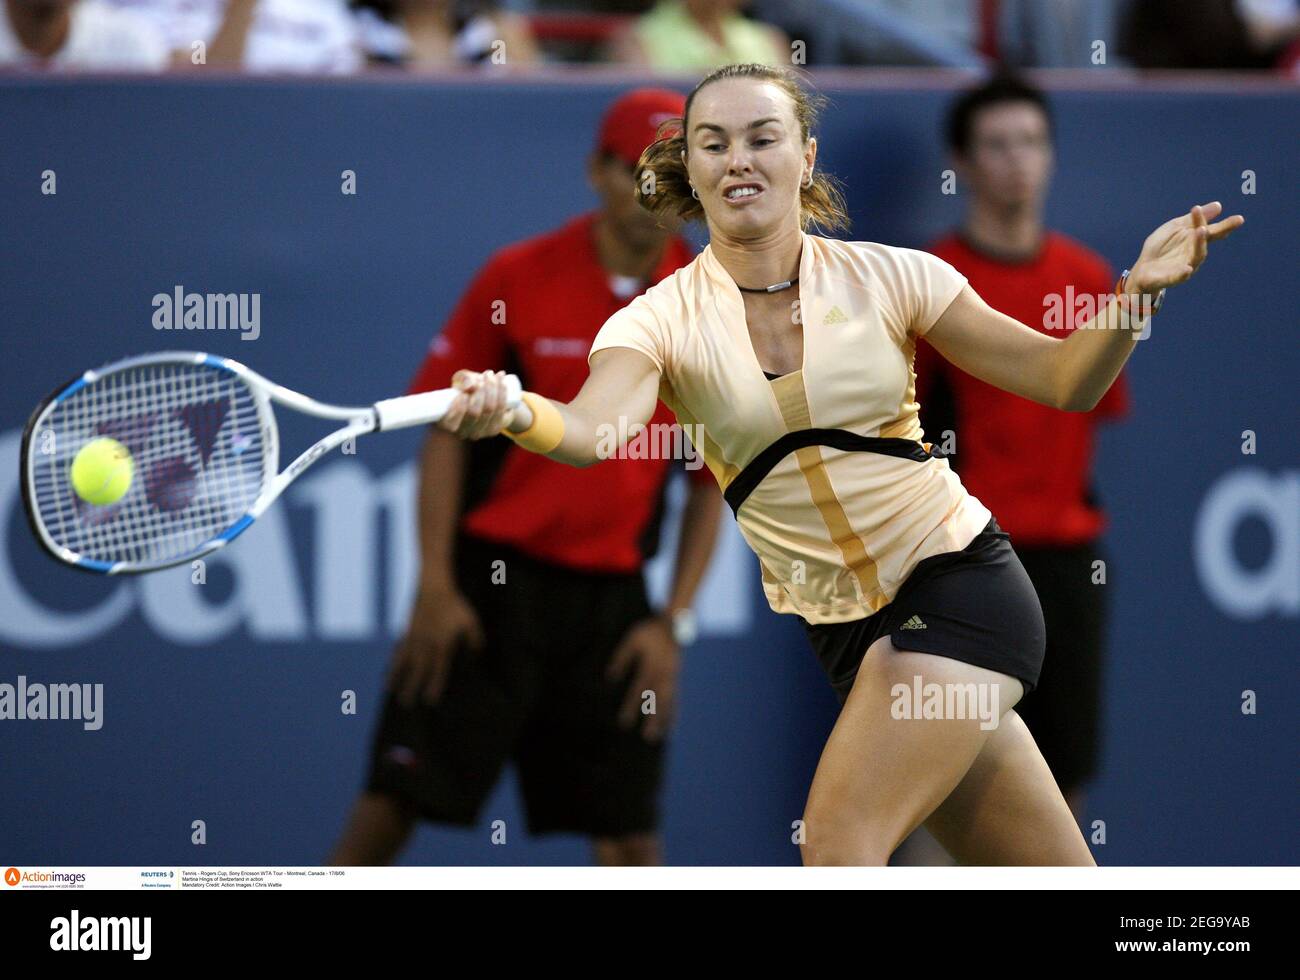 Tennis - Rogers Cup, Sony Ericsson WTA Tour - Montreal, Canada - 17/8/06  Martina Hingis of Switzerland in action  Mandatory Credit: Action Images / Chris Wattie Stock Photo